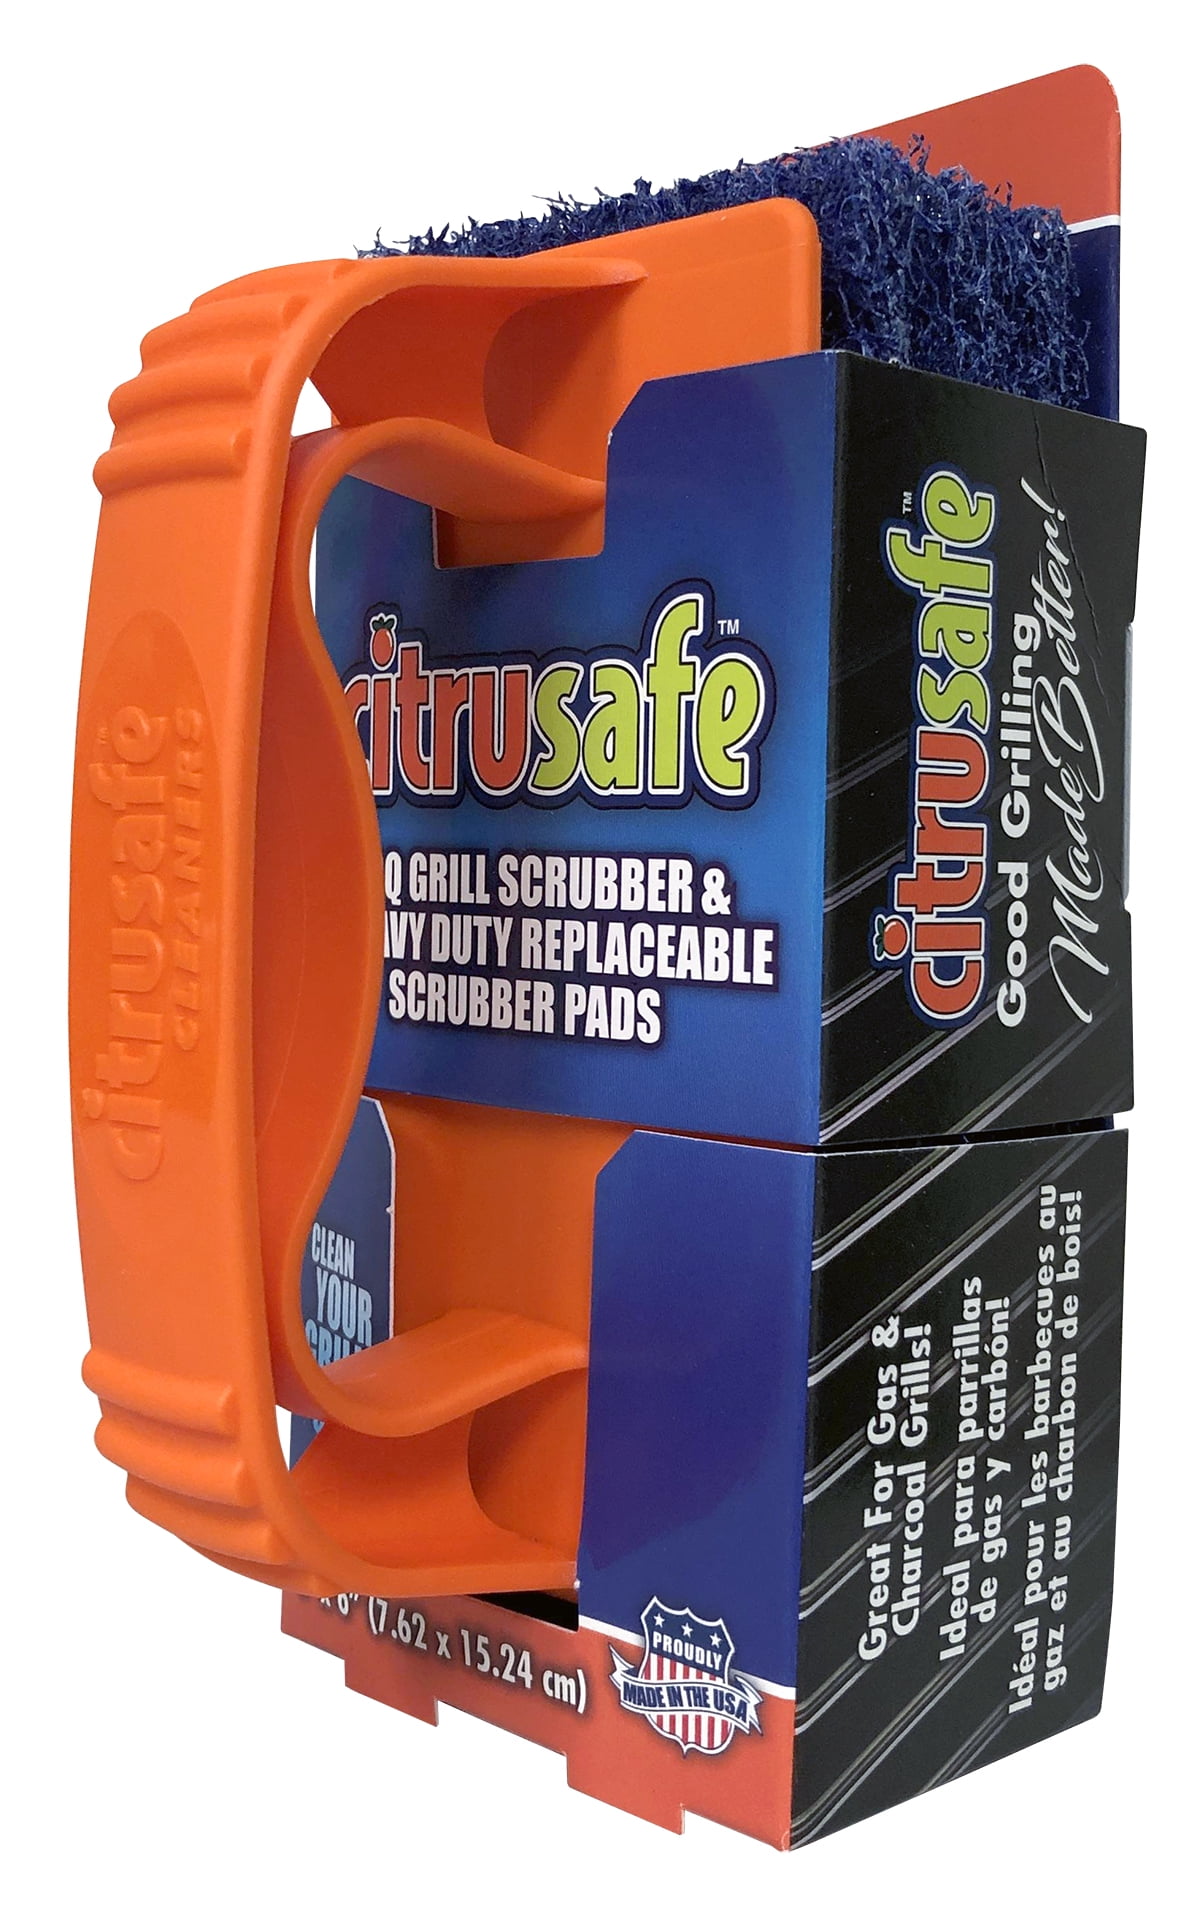 Lynx Grill Parts: Citrusafe Complete Grill Cleaning Care Kit